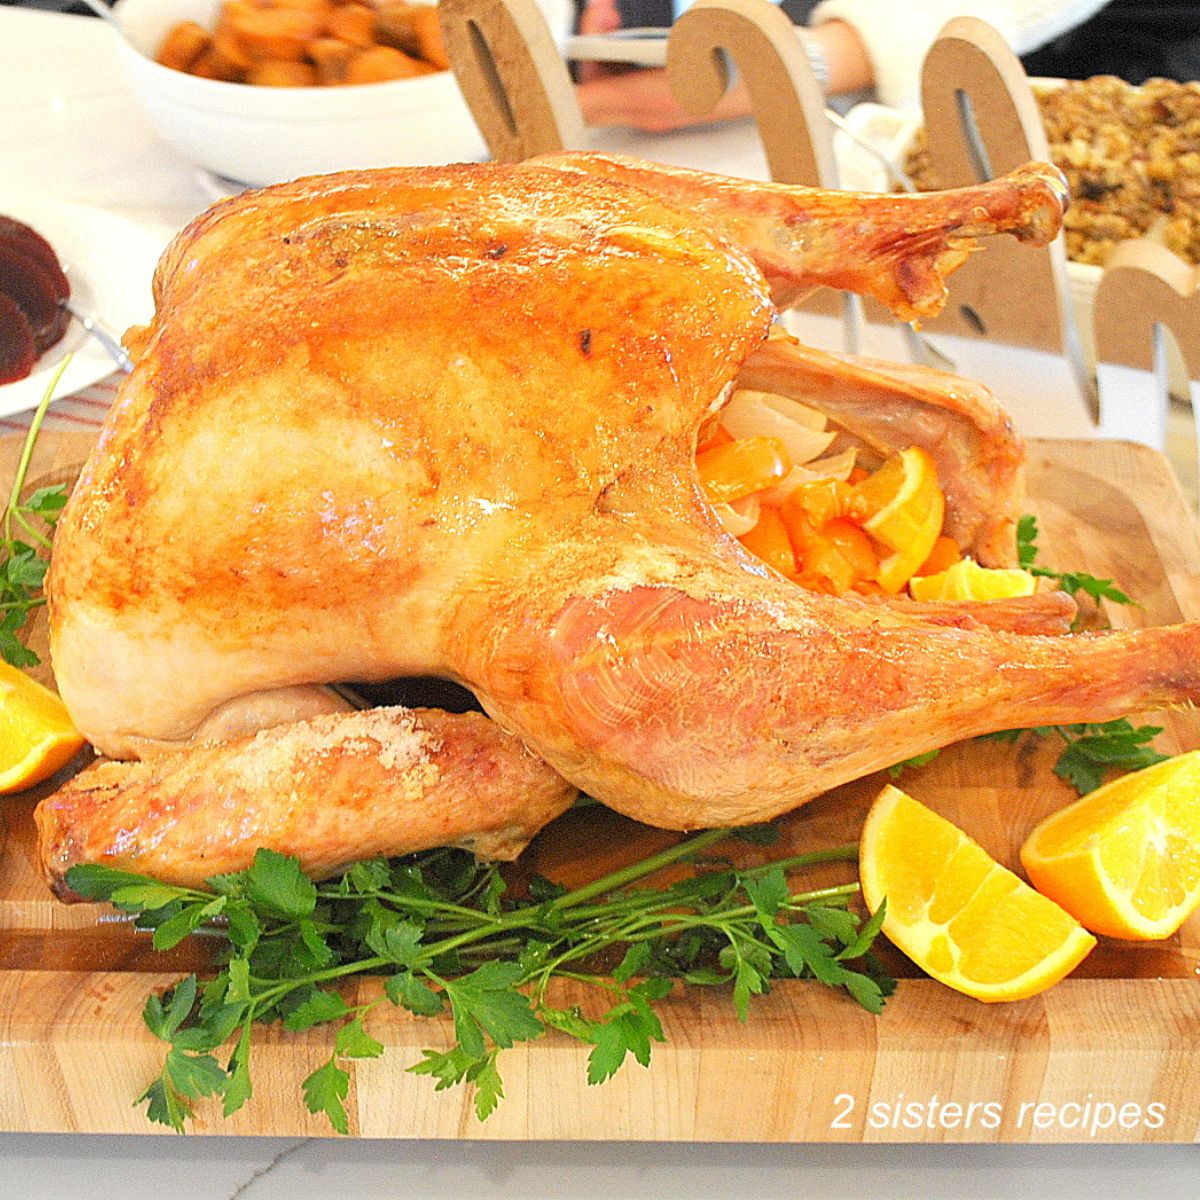 Roasted Thanksgiving Turkey by 2sistersrecipes.com